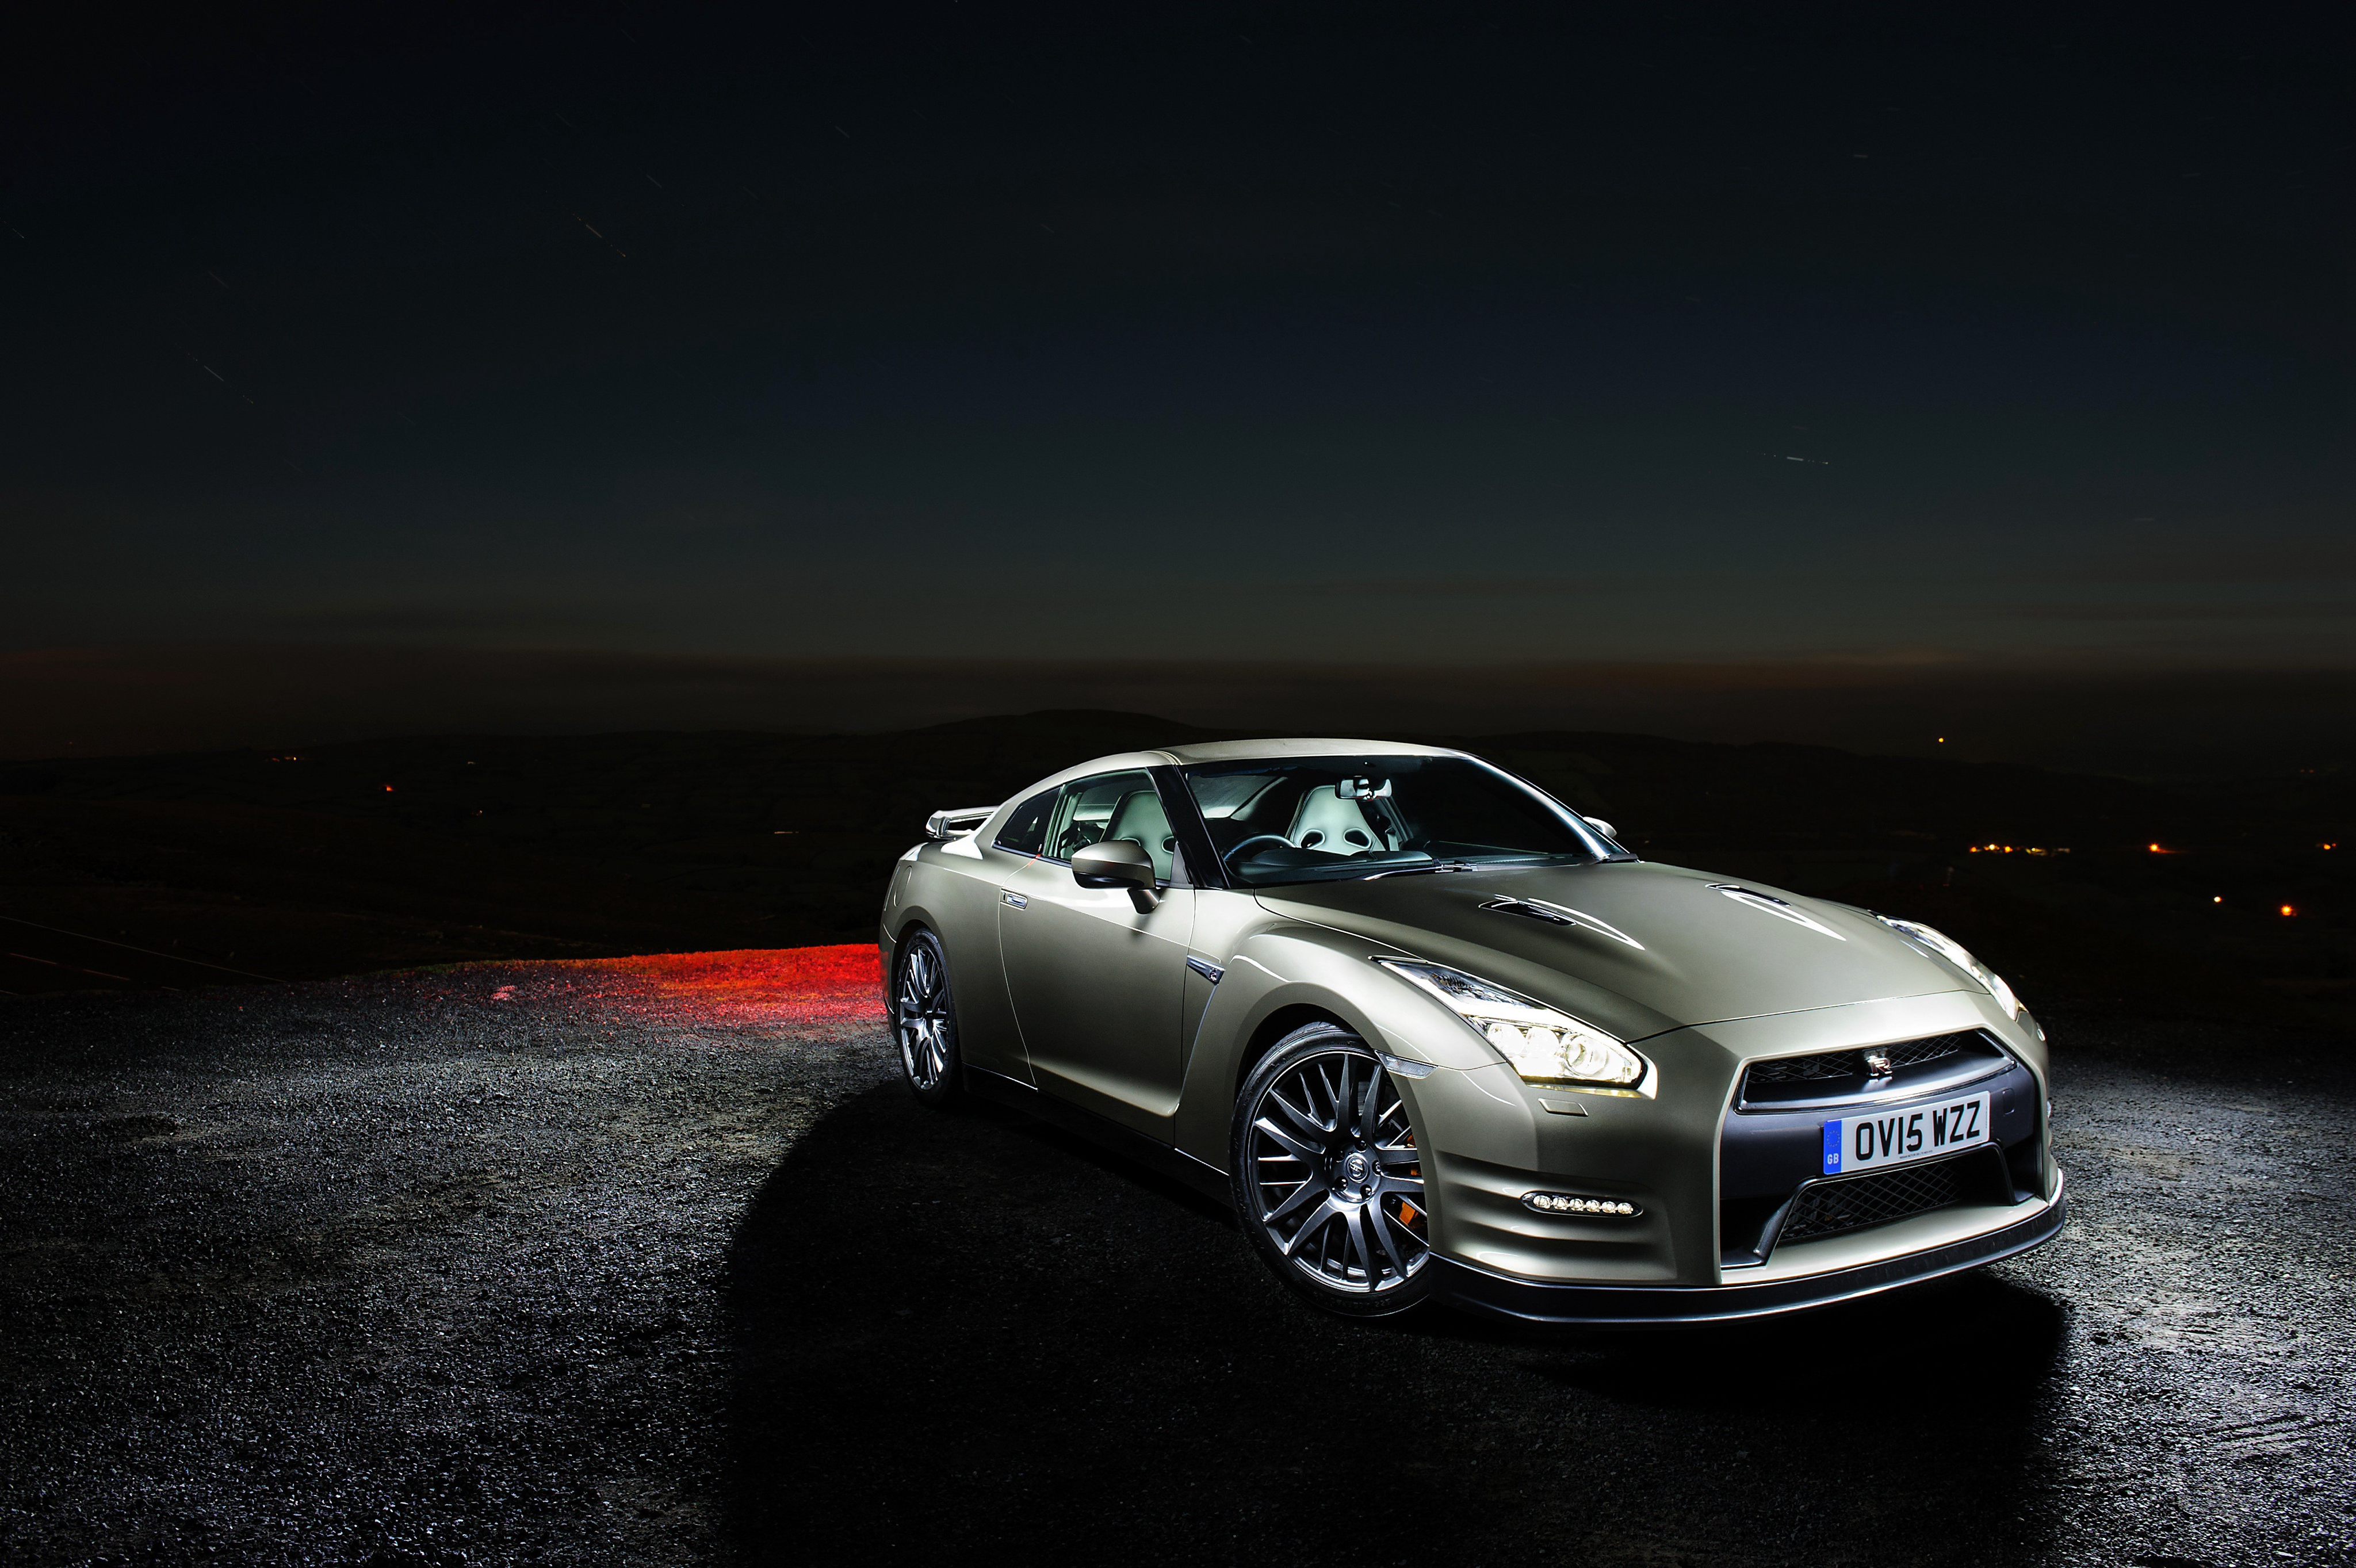 cars, nissan, night, side view, gt-r